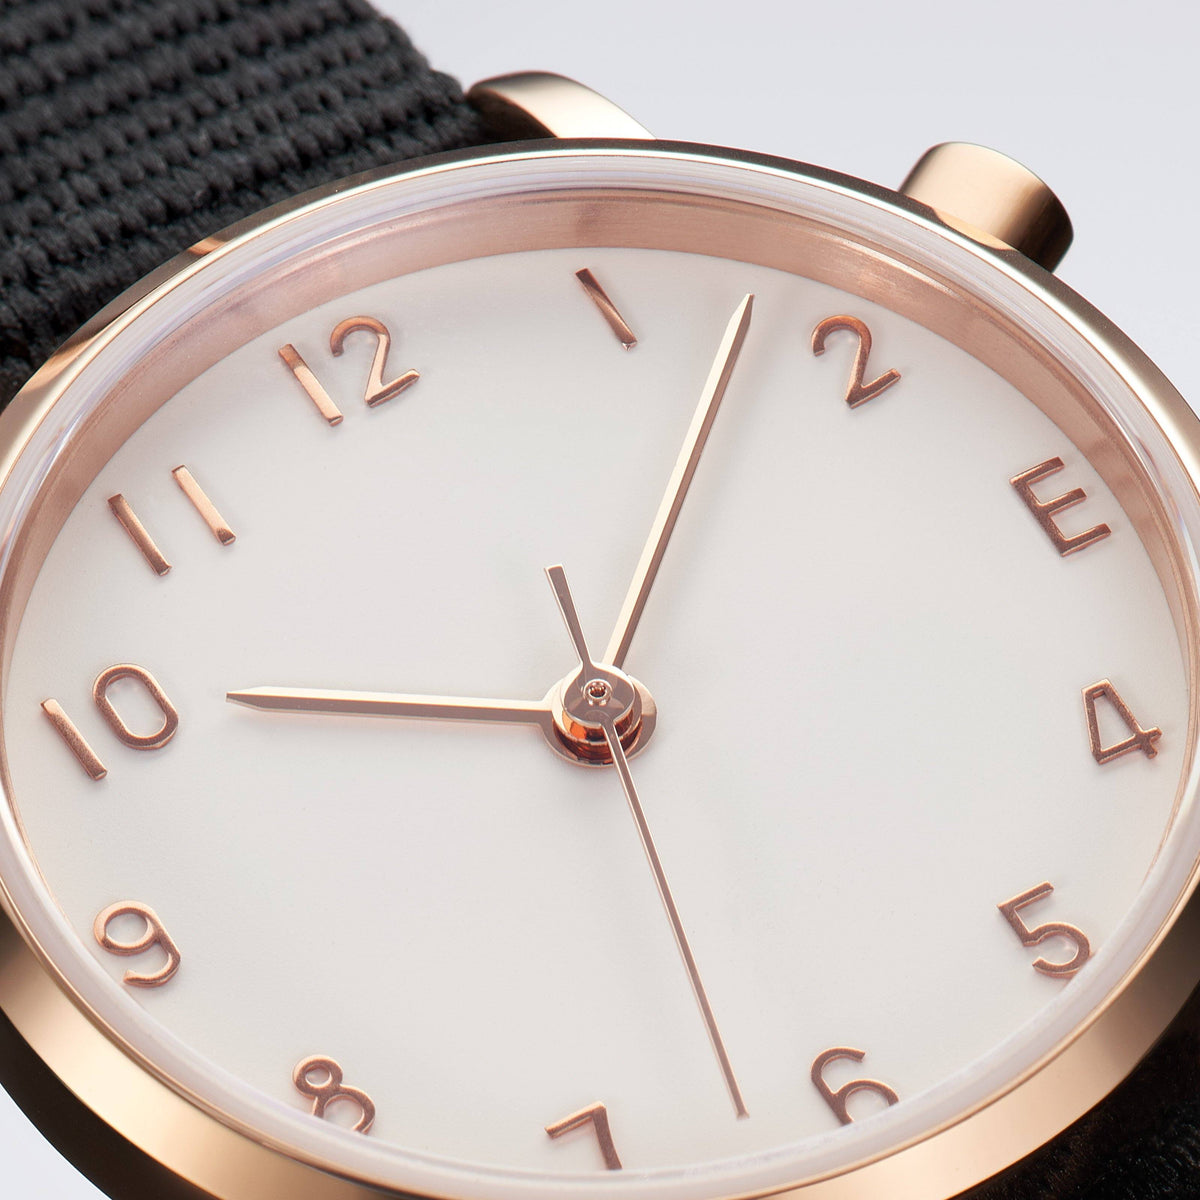 The White and Rose Gold Watch - Midnight (Kids)